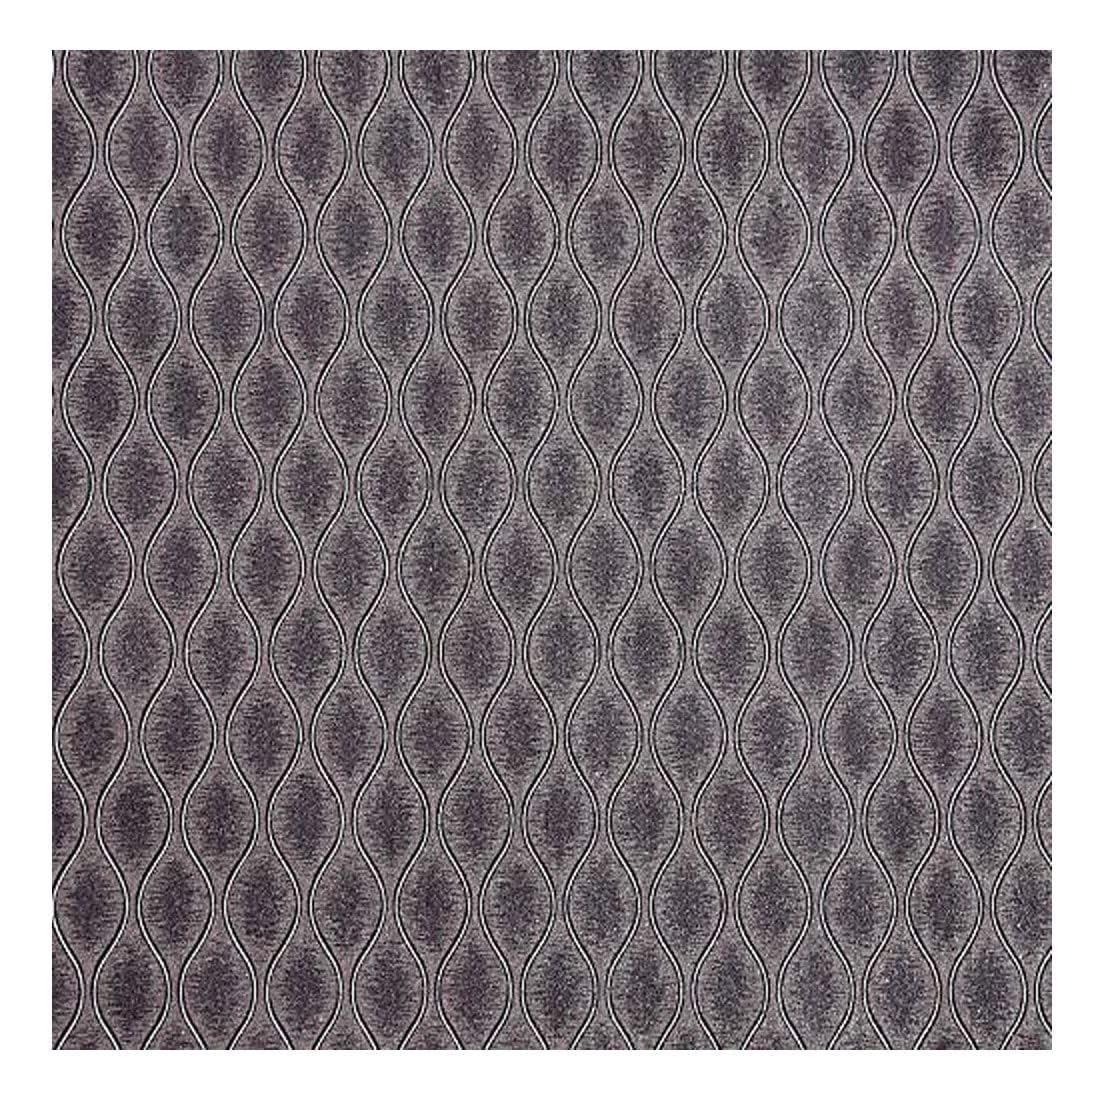 3D Latest Waves Design Grey Wallpaper Roll for Home Walls 57 Sq Ft (0.53m or 33 Feet)